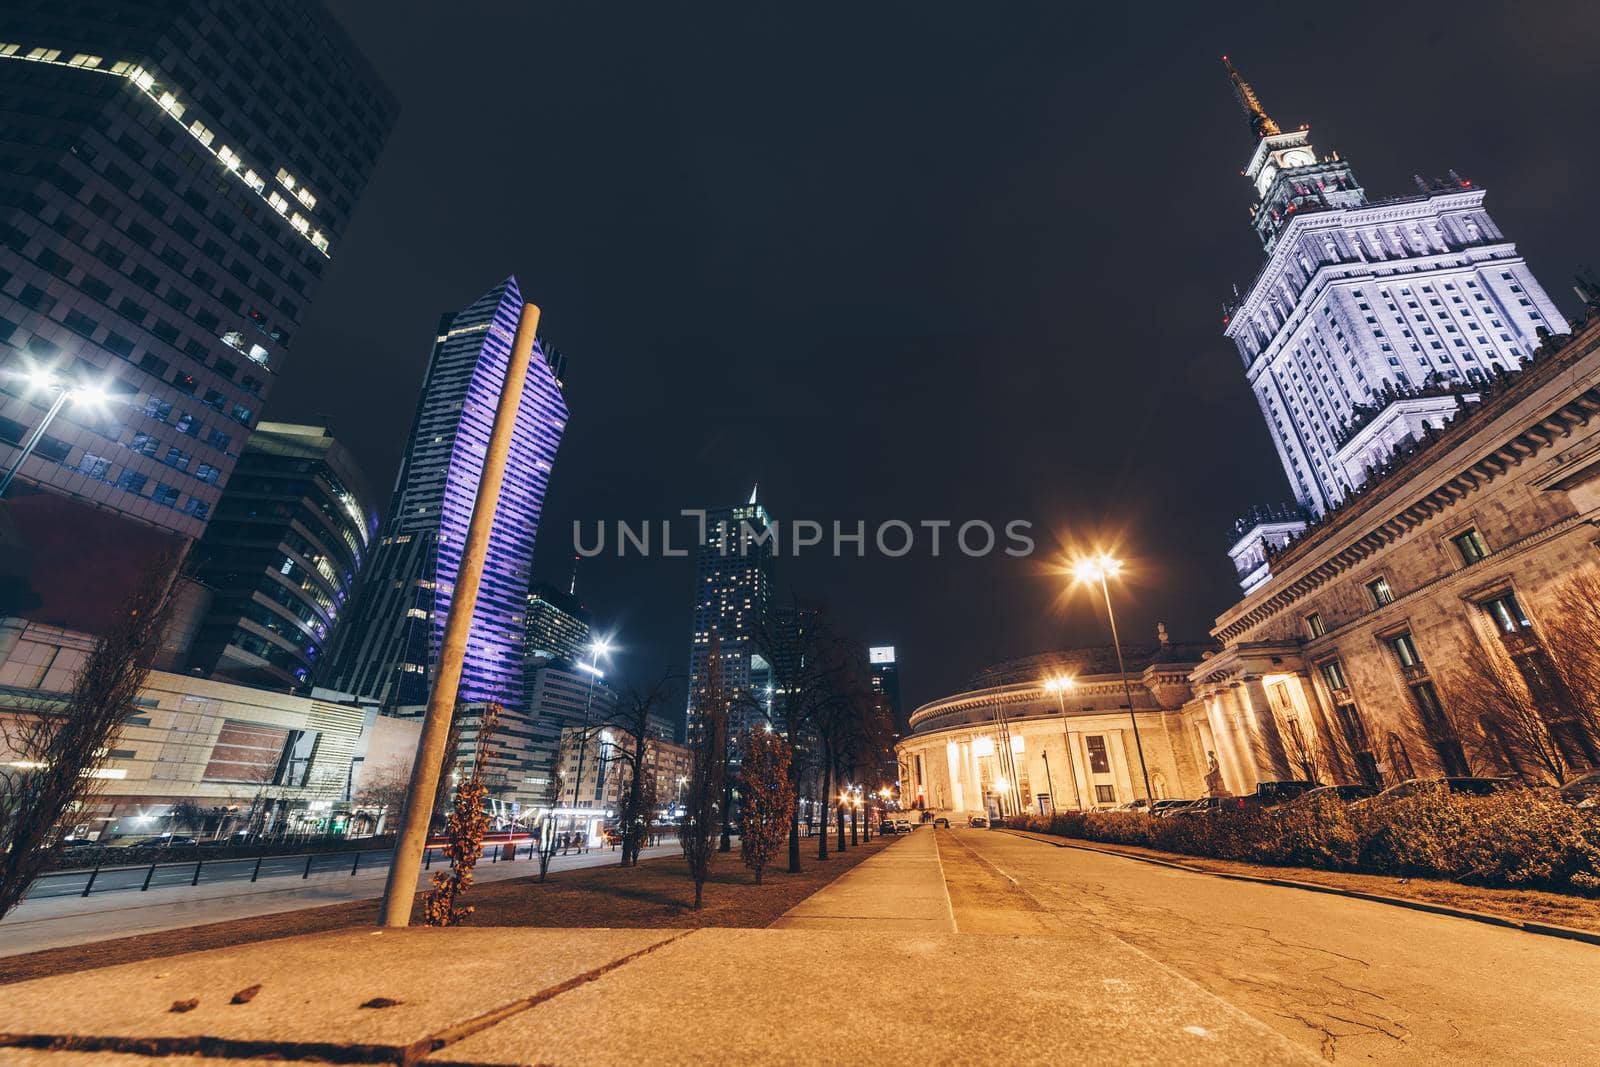 Warsaw at night in the city center with modern and ancient building on the background.